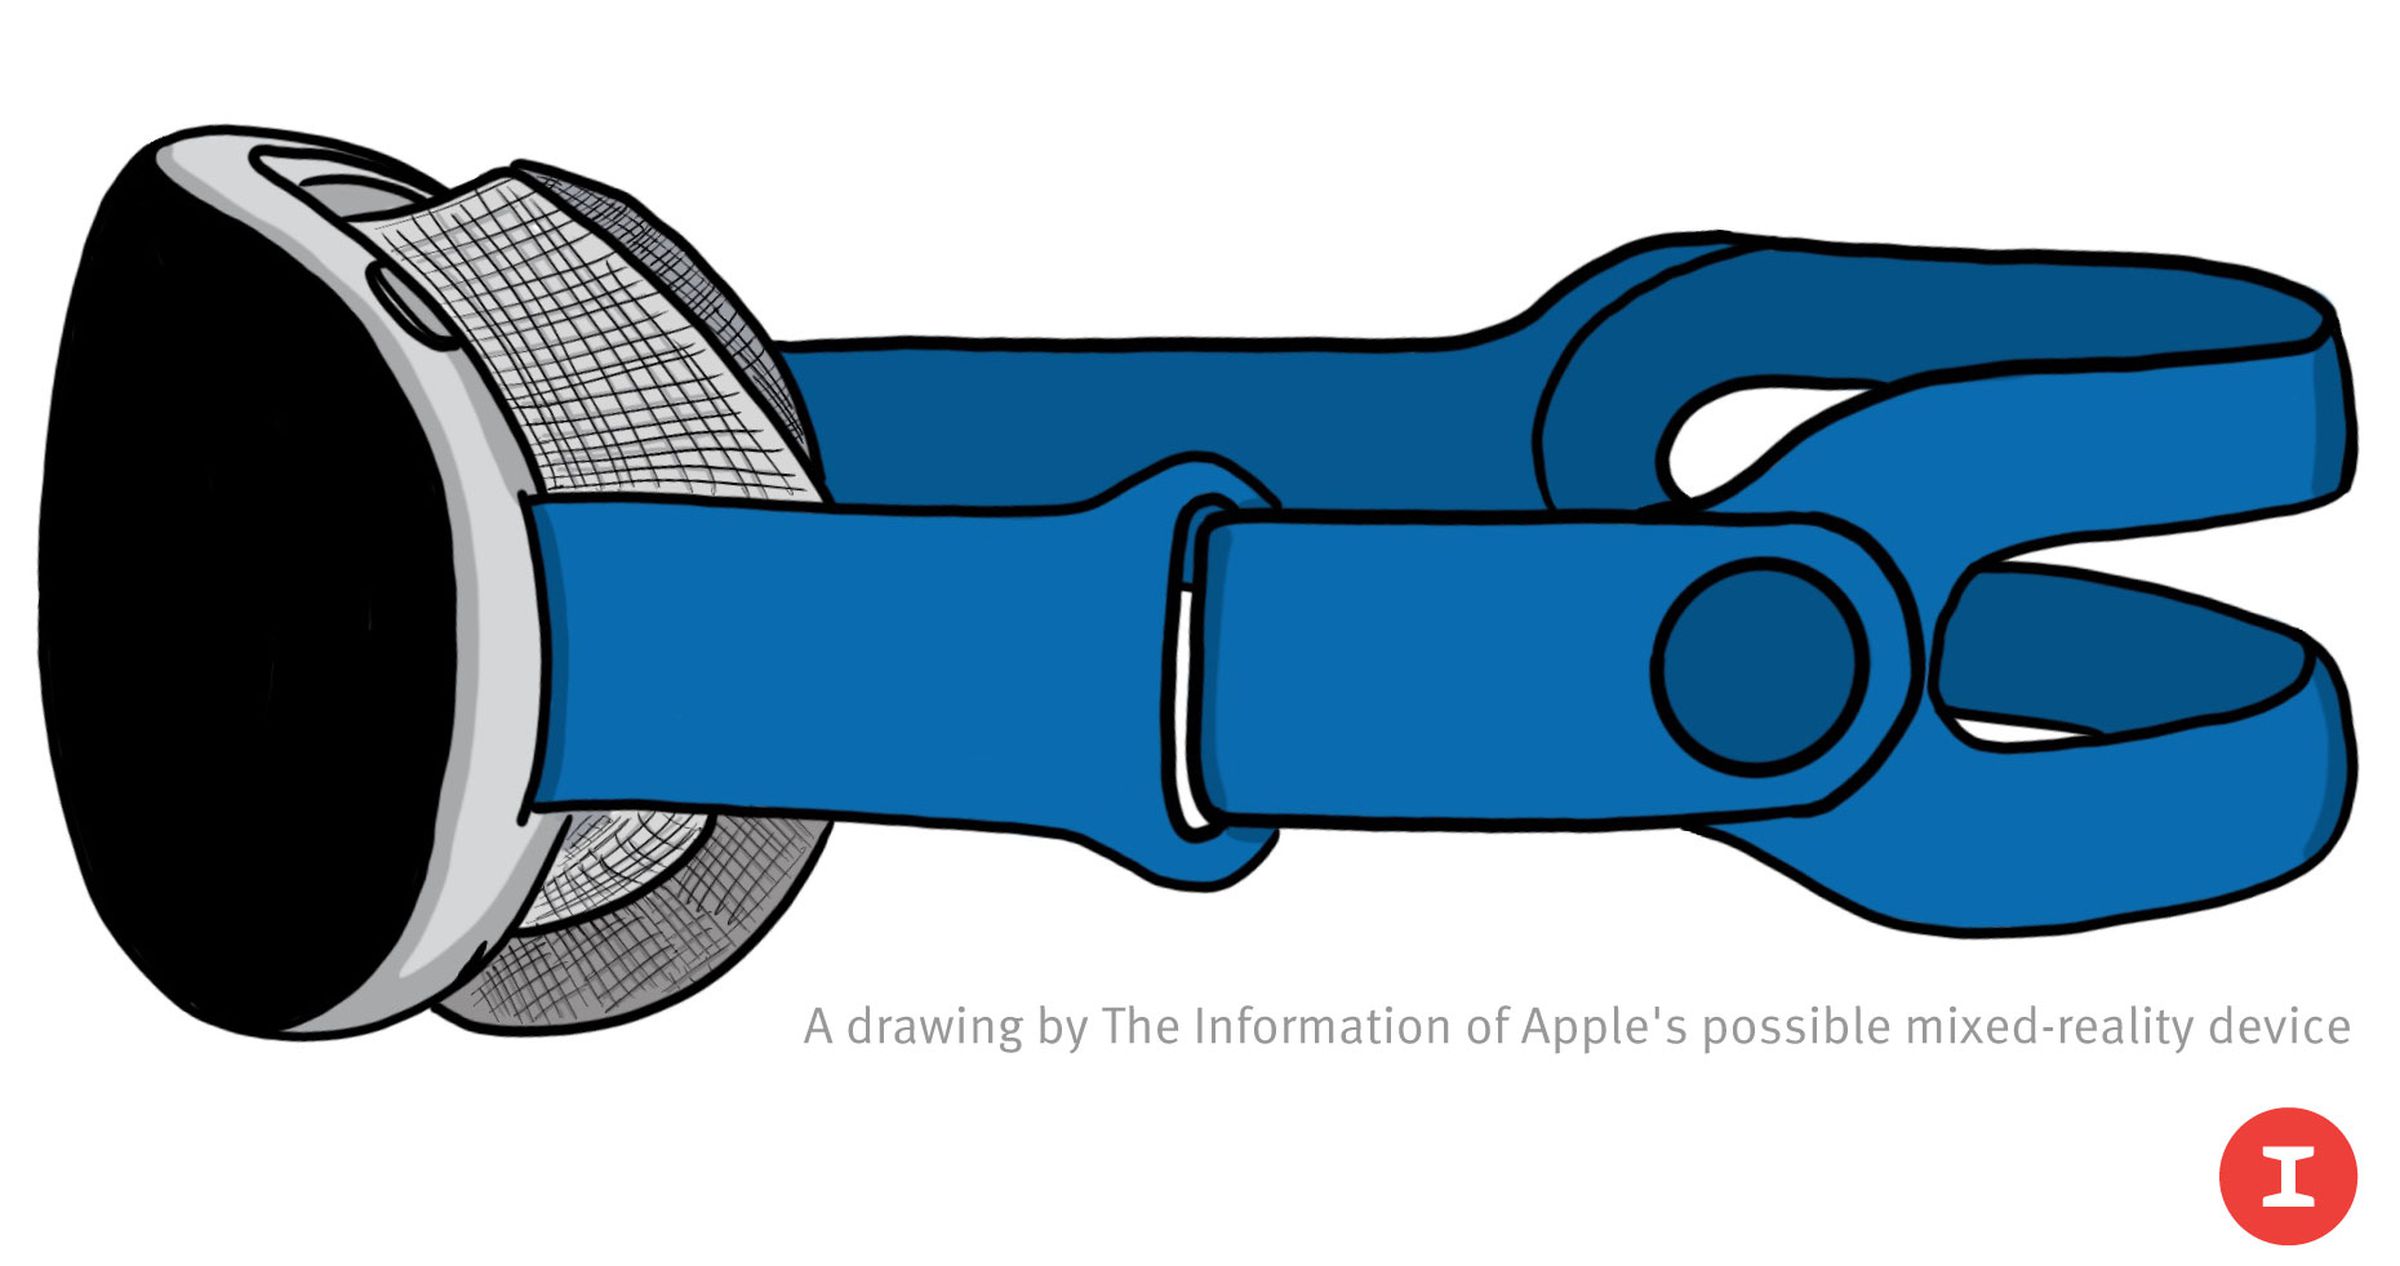 A drawing The Information made of Apple’s headset based on what it’s heard.